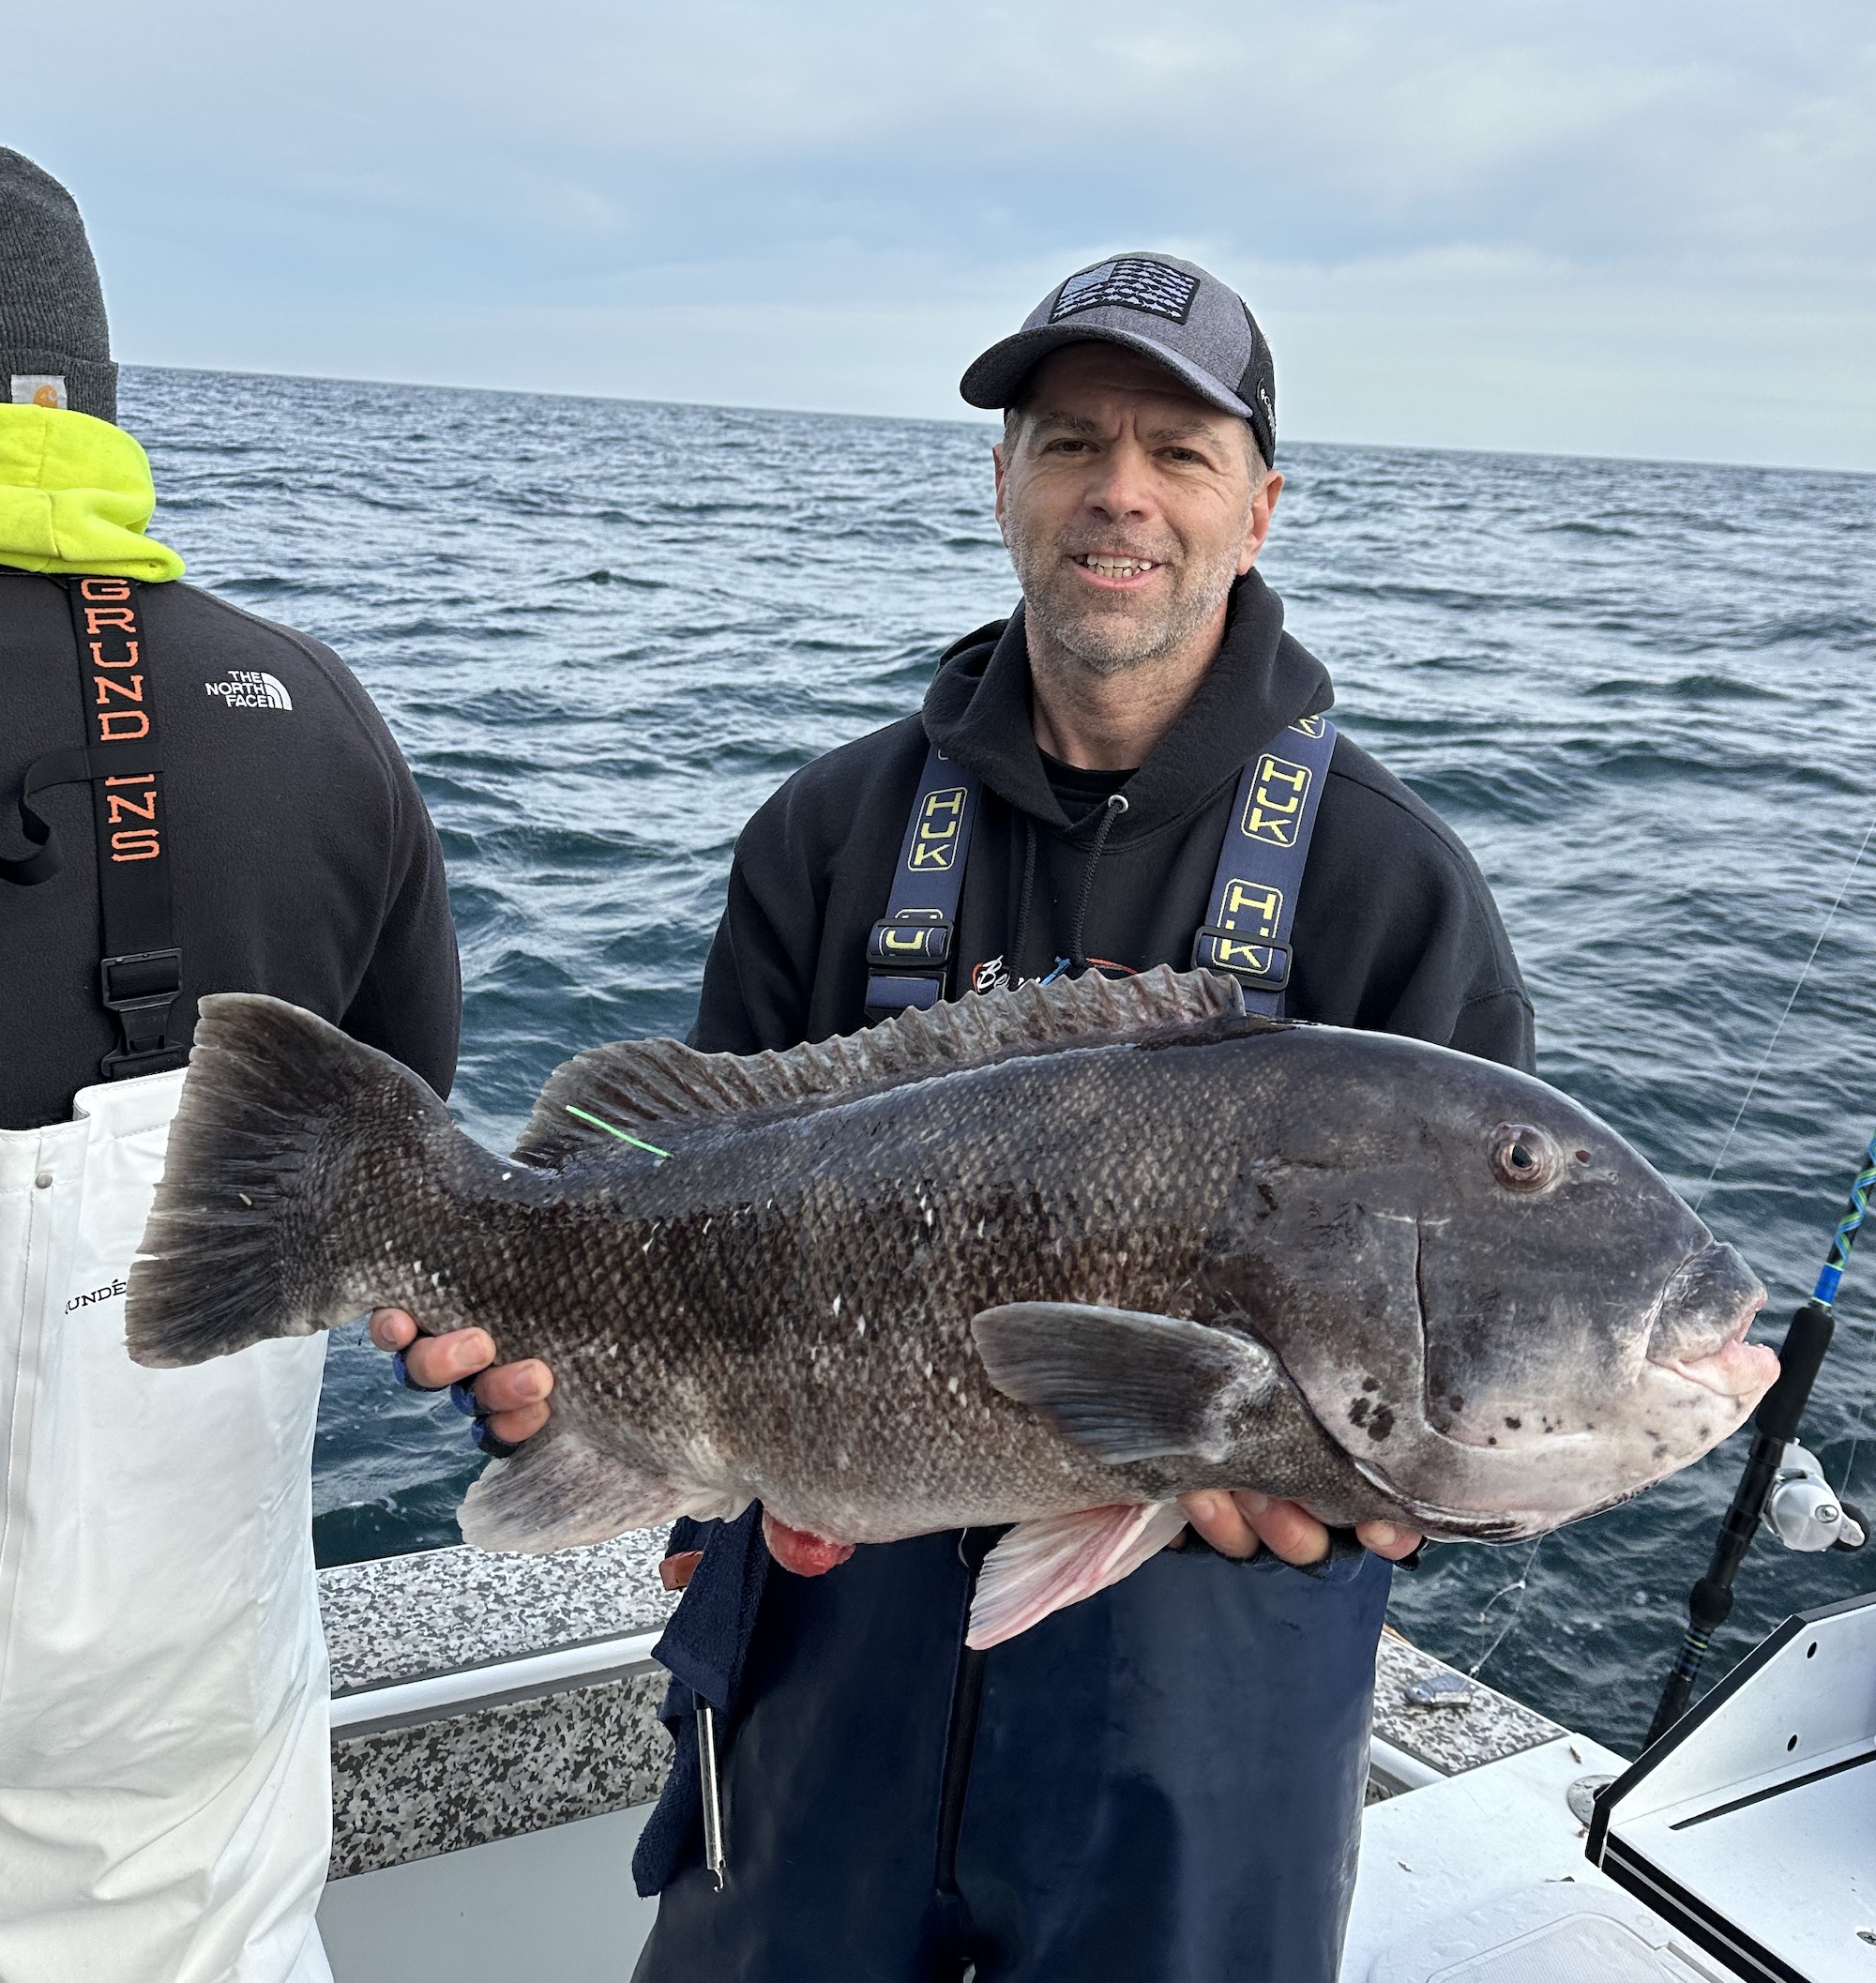 Tautog Up to 18.5 Pounds